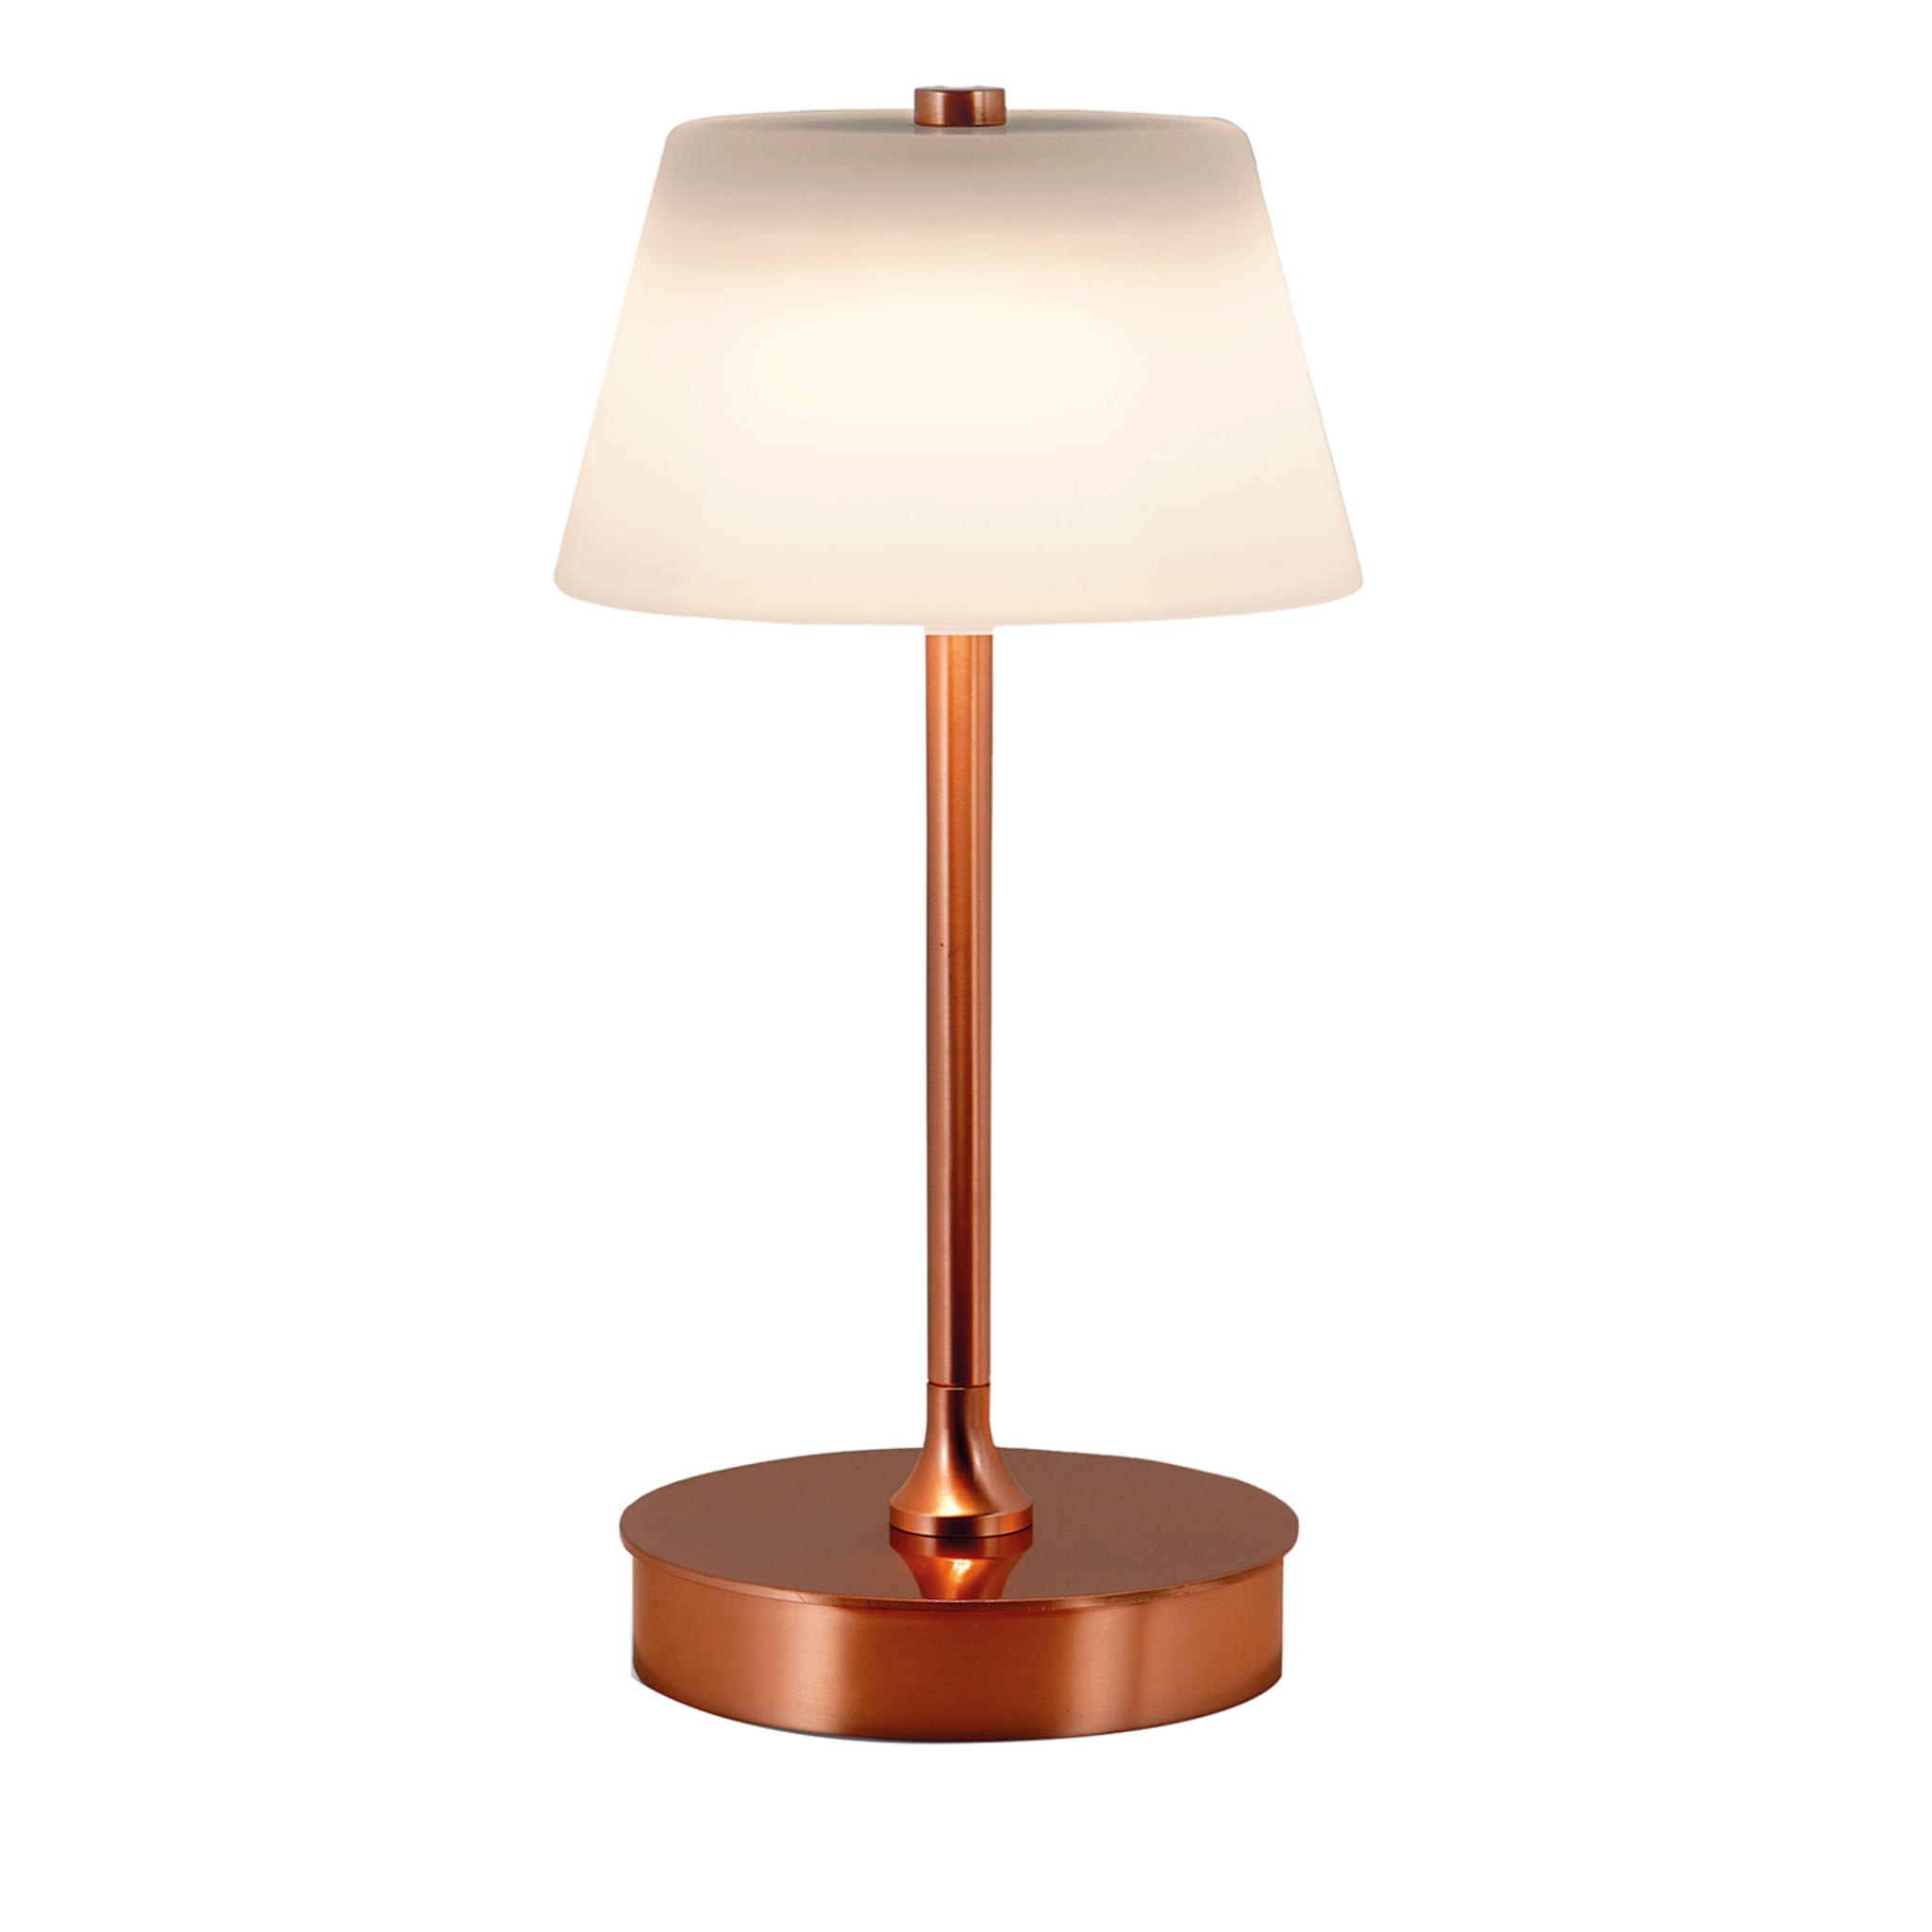 Lumetto Copper Table Lamp by Stefano Tabarin - Main view